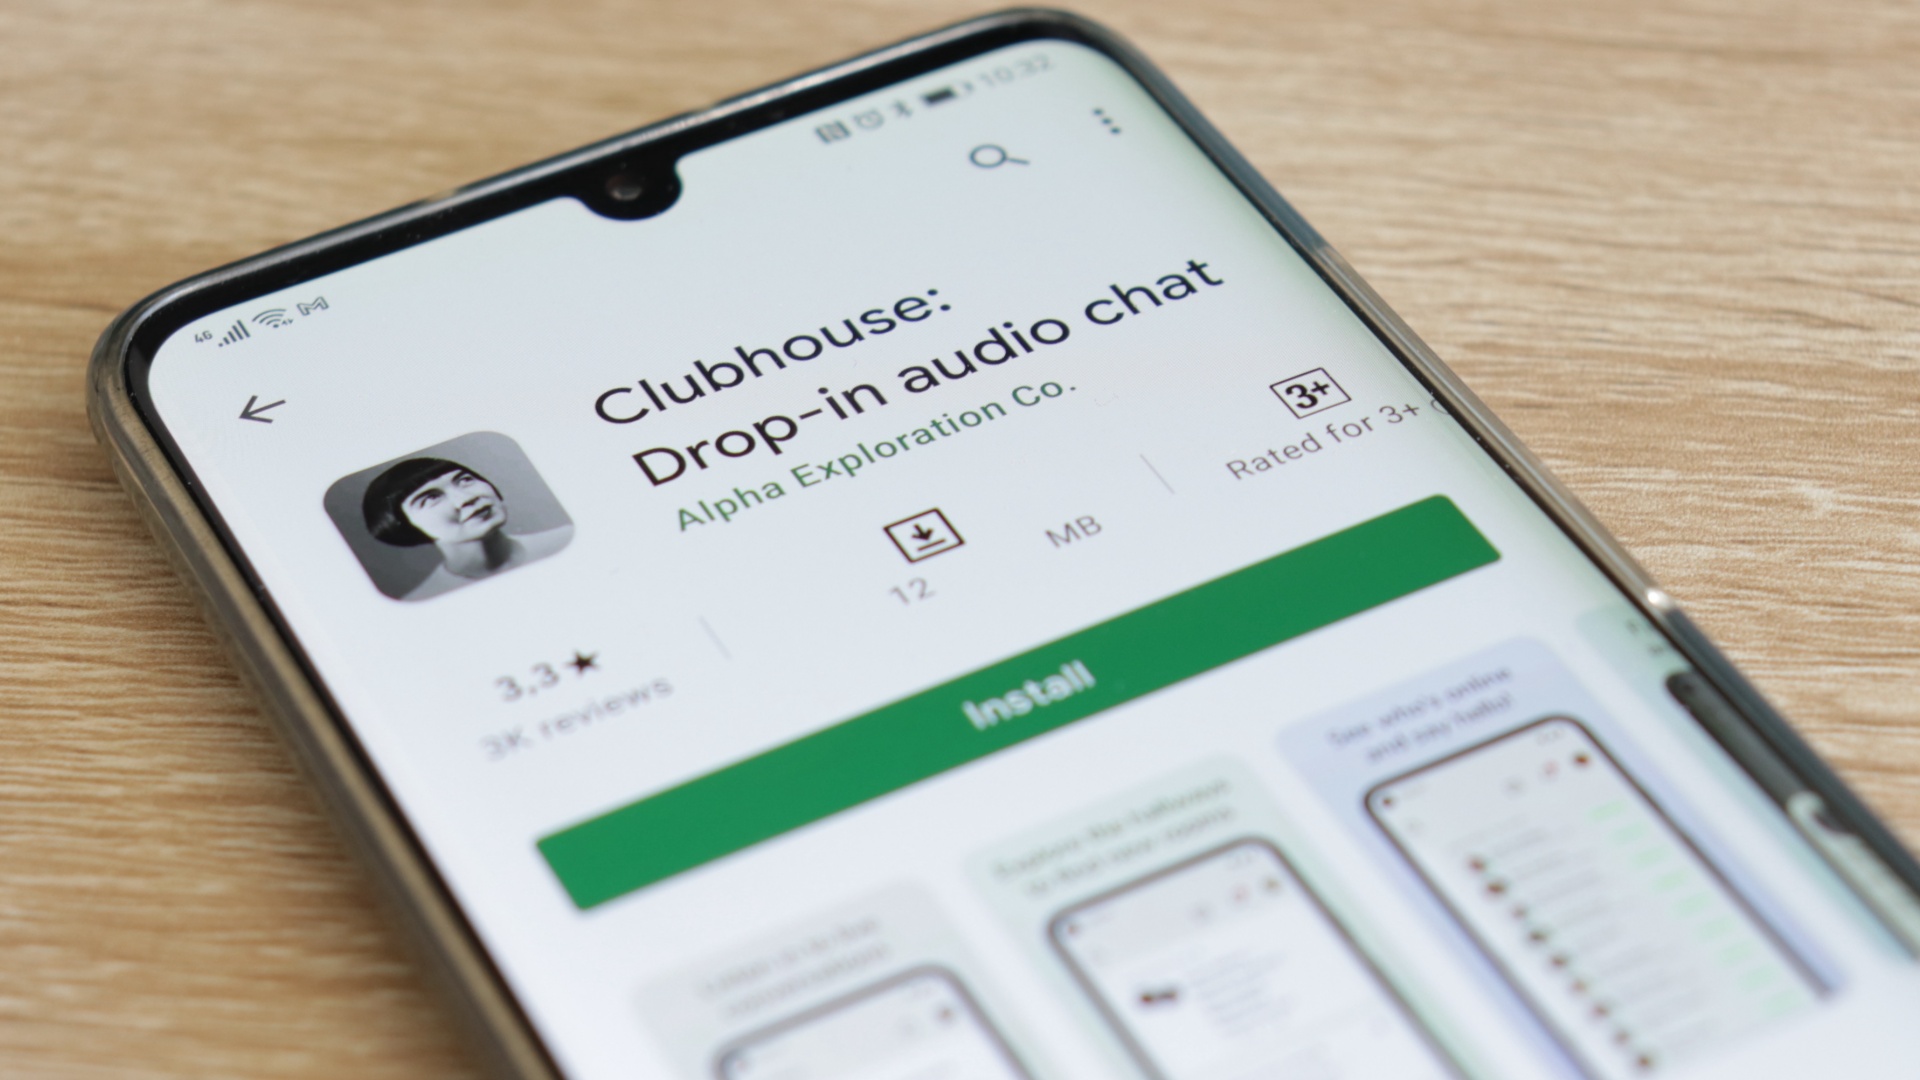 Earlier this week Clubhouse confirmed that the Android version of its invite-only app would be made available globally by the afternoon of 21st May. S